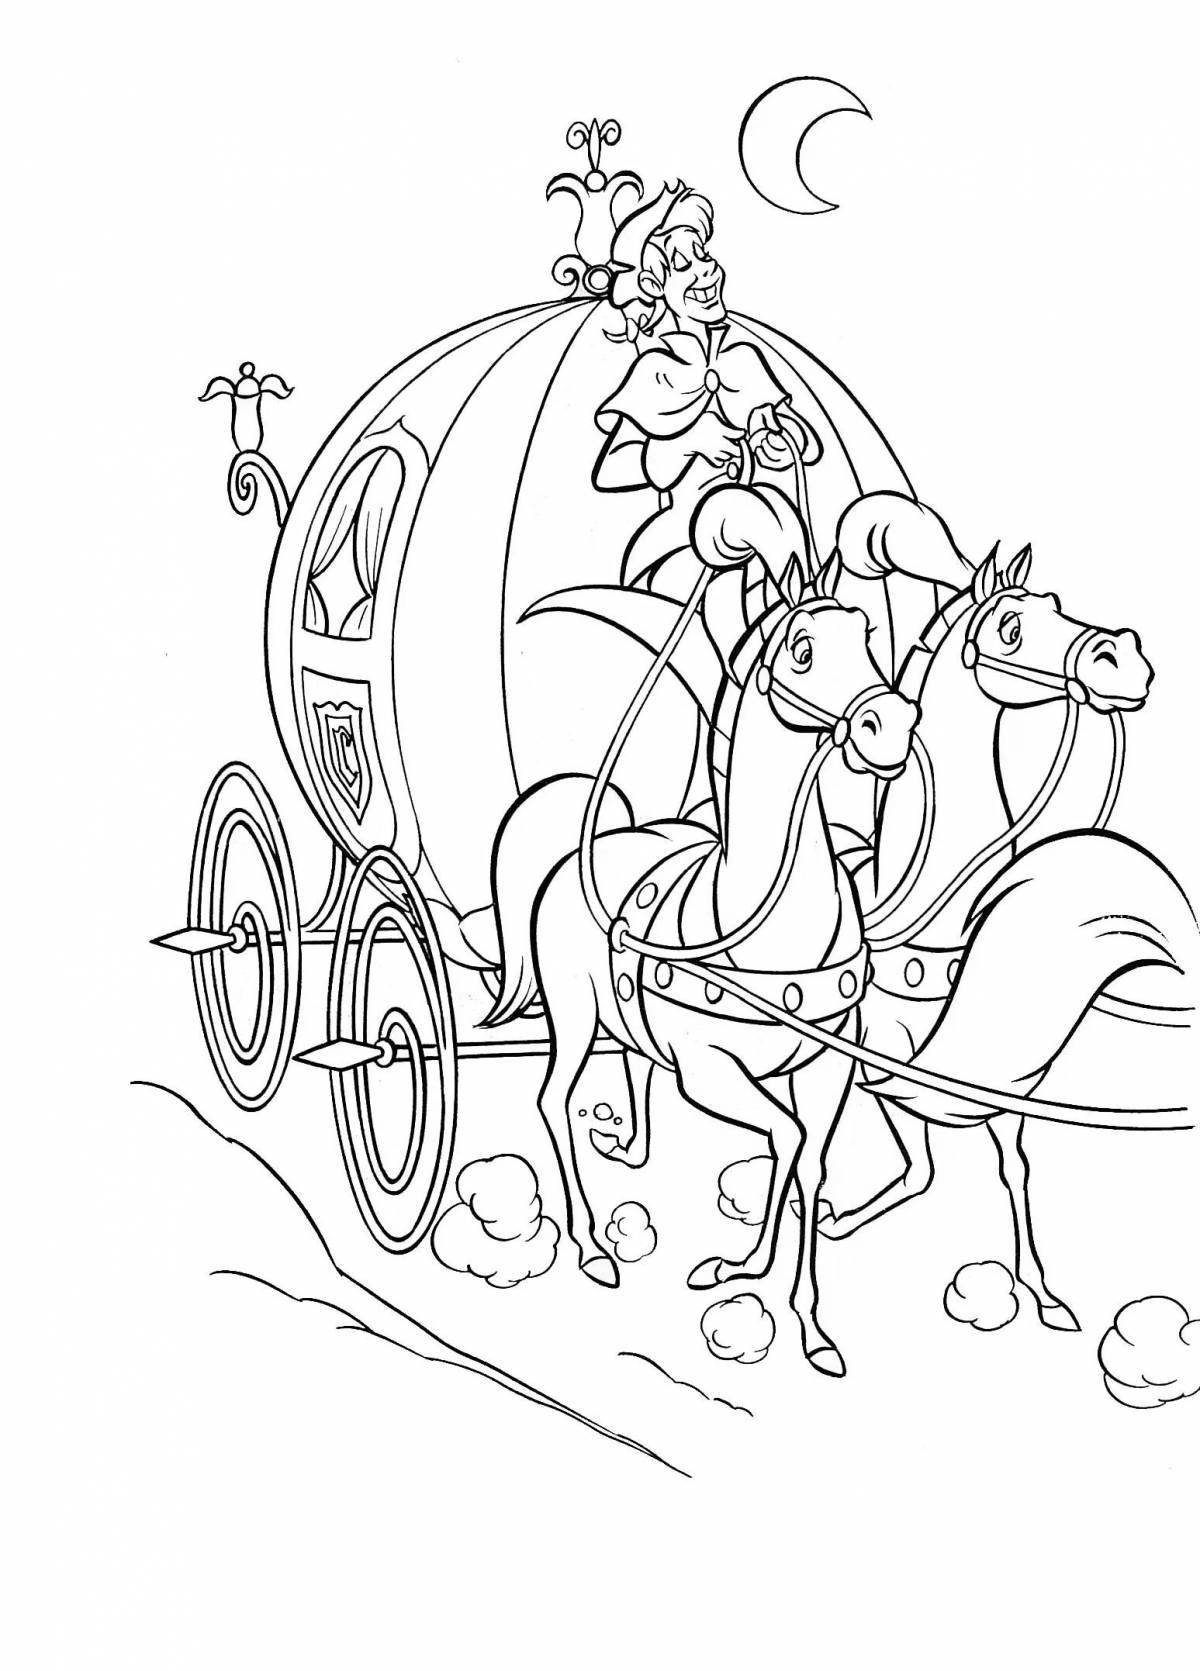 Violent carriage with a horse coloring book